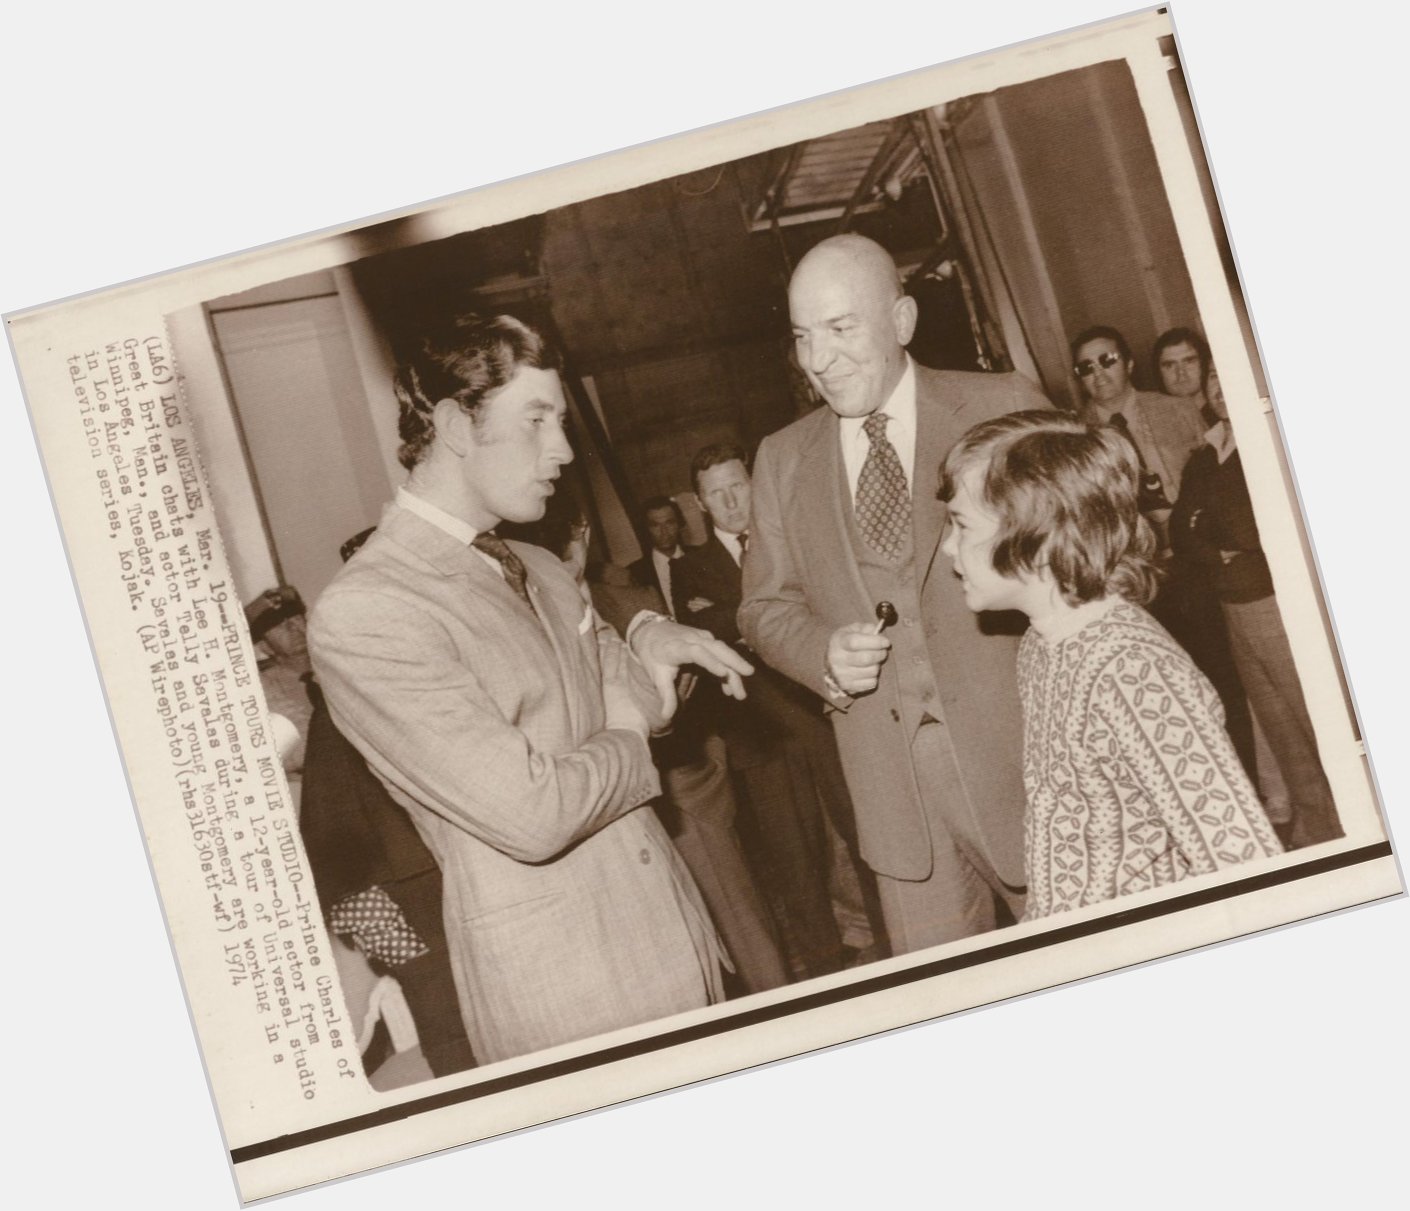 Happy Birthday to my good friend Lee Montgomery!  Here he is as a young boy with Prince Charles & Telly Savalas. 